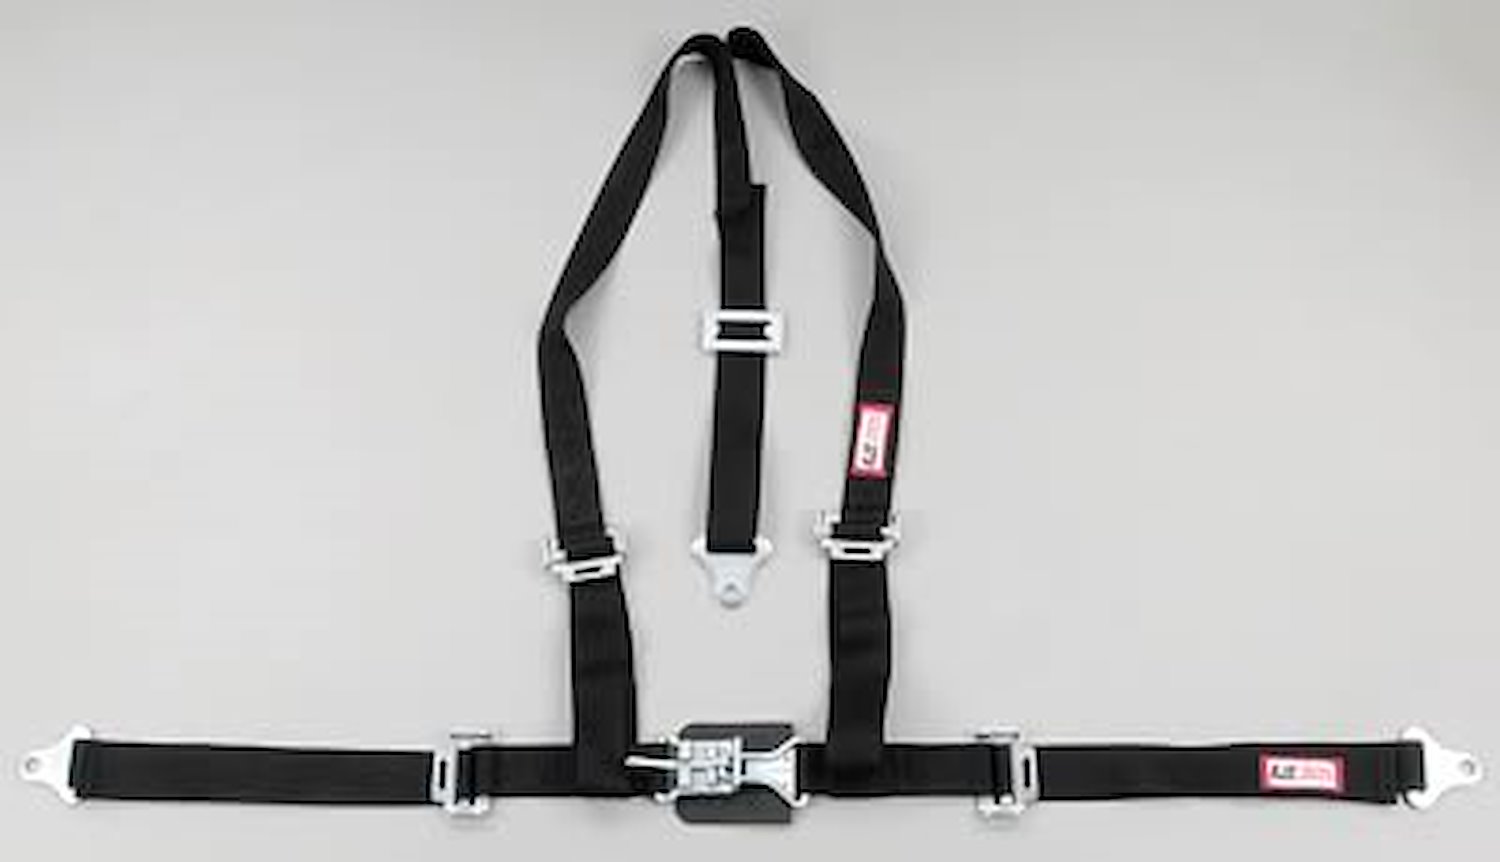 NON-SFI L&L HARNESS 2 PULL UP Lap Belt SEWN IN 2 S.H. Y FLOOR Mount w/STERNUM STRAP ALL WRAP ENDS BLACK